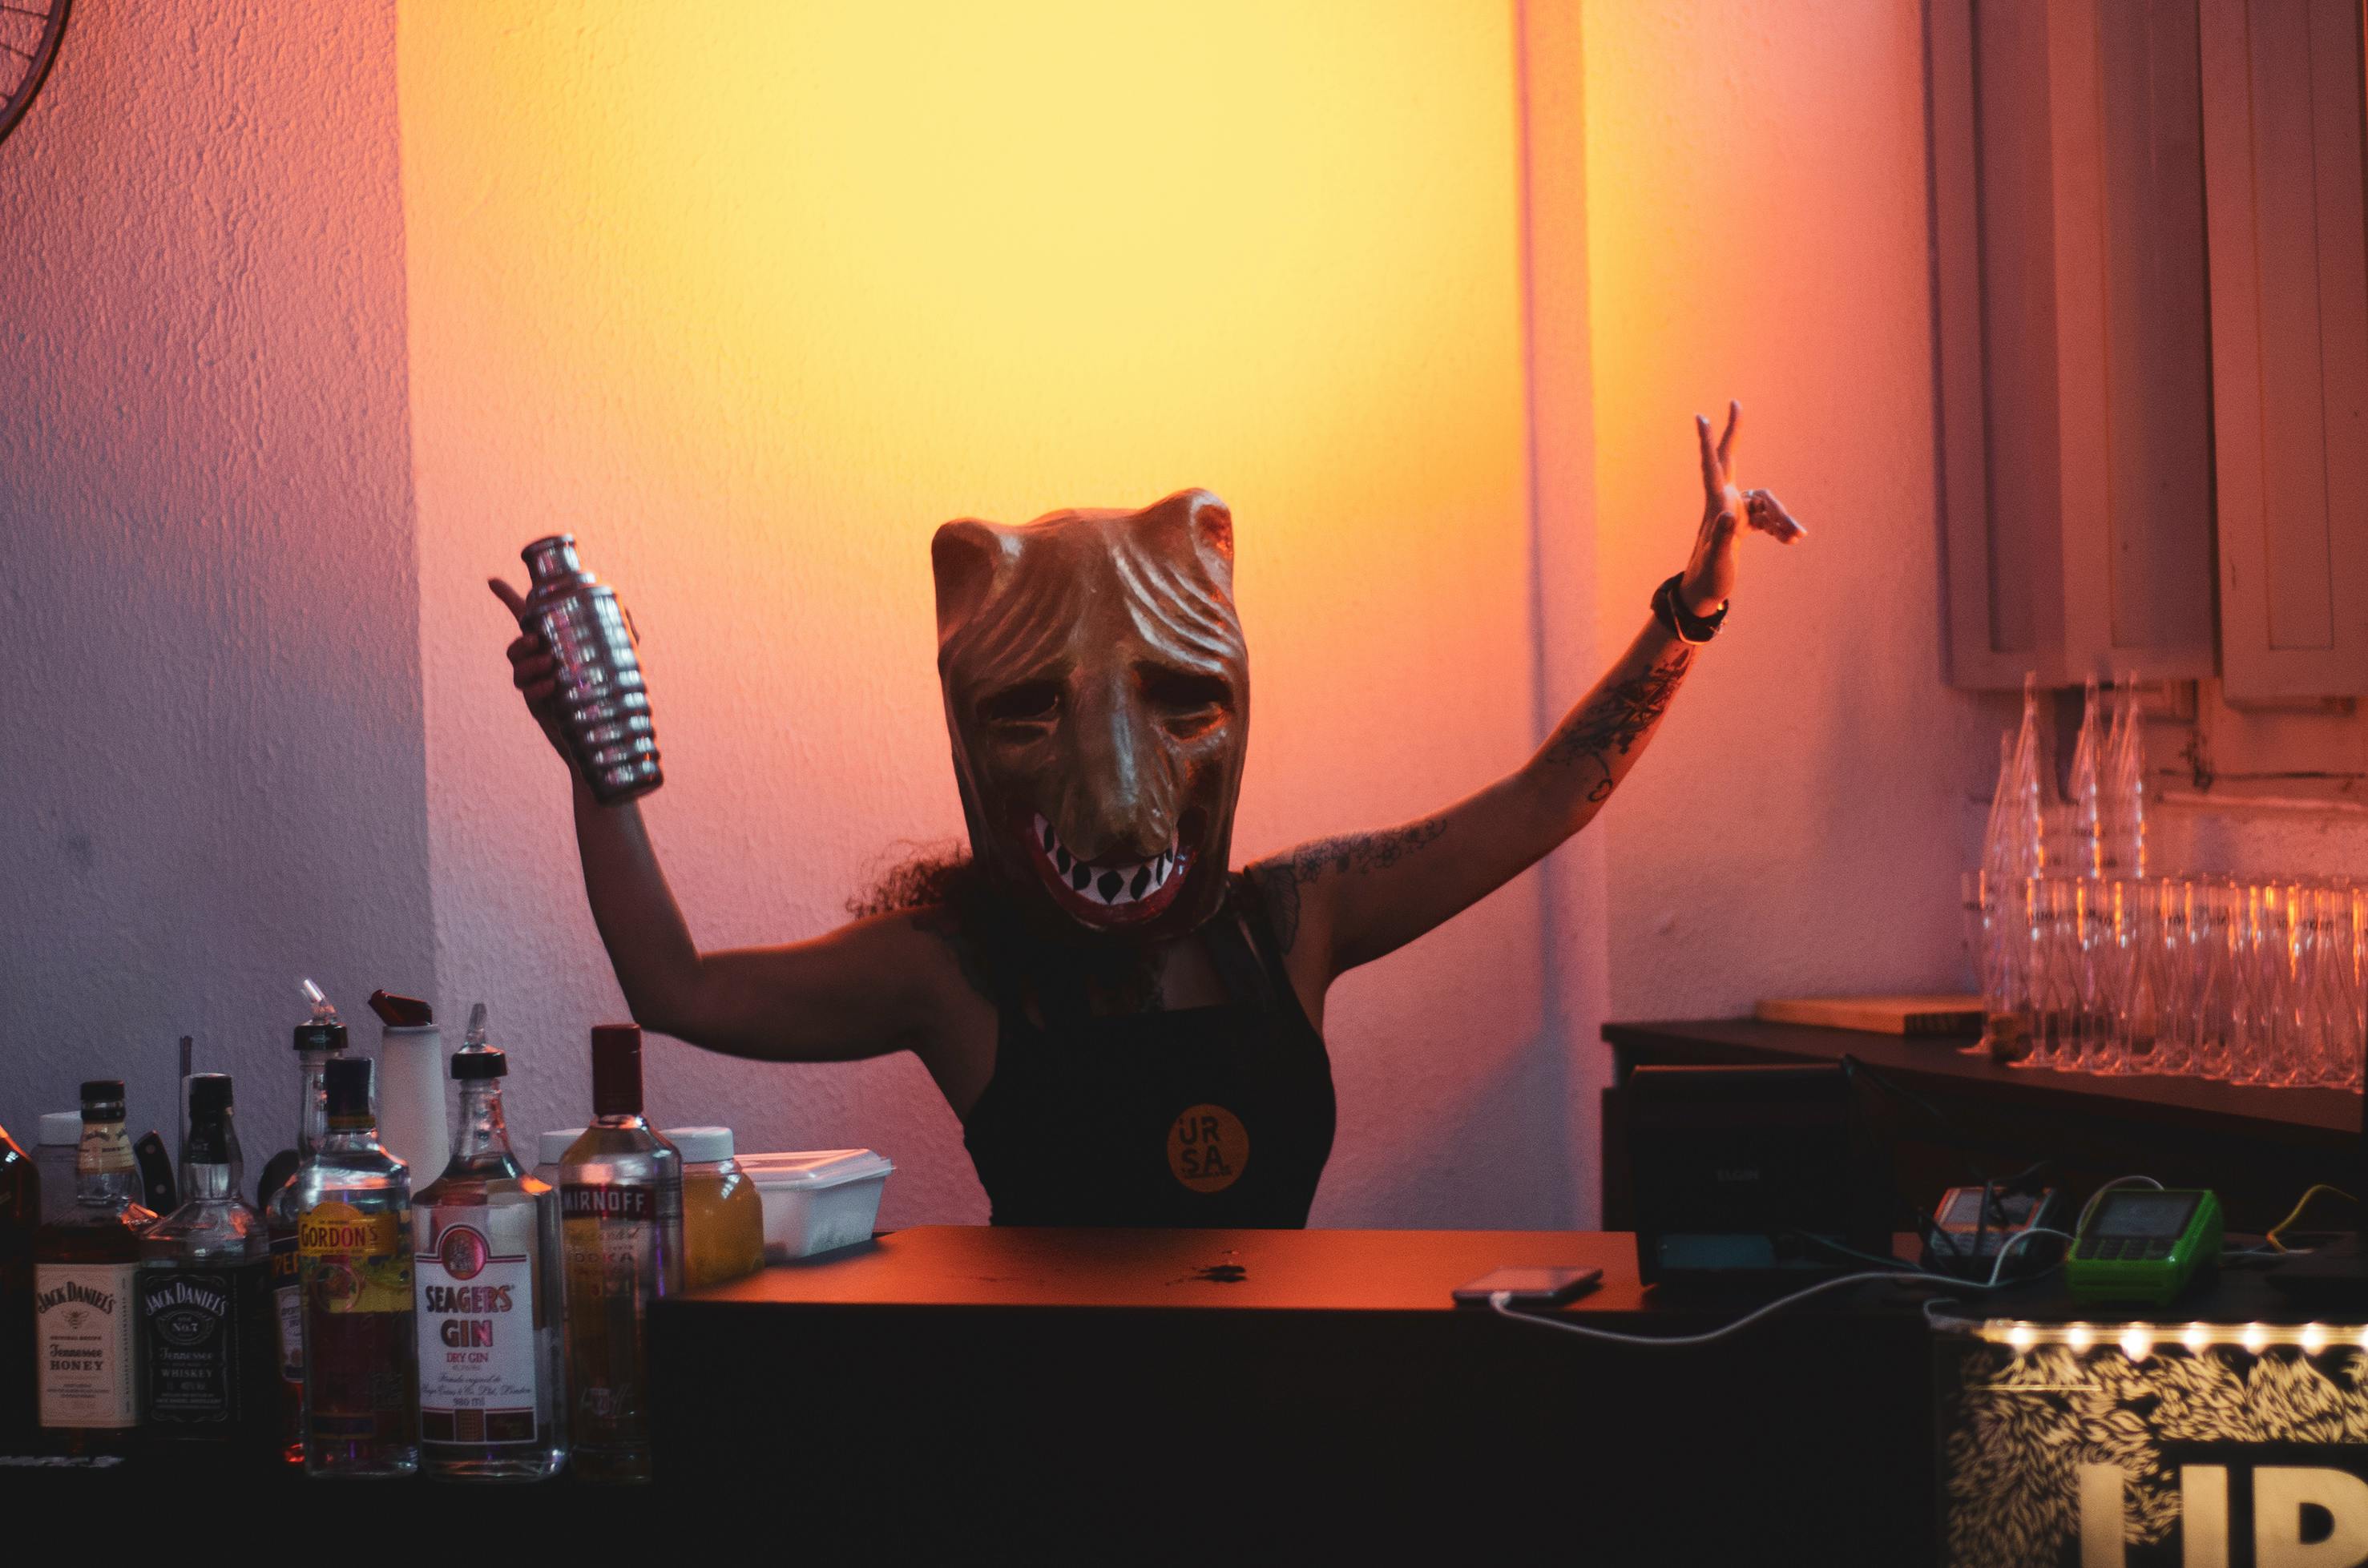 A person posing in a mask, holding a drink